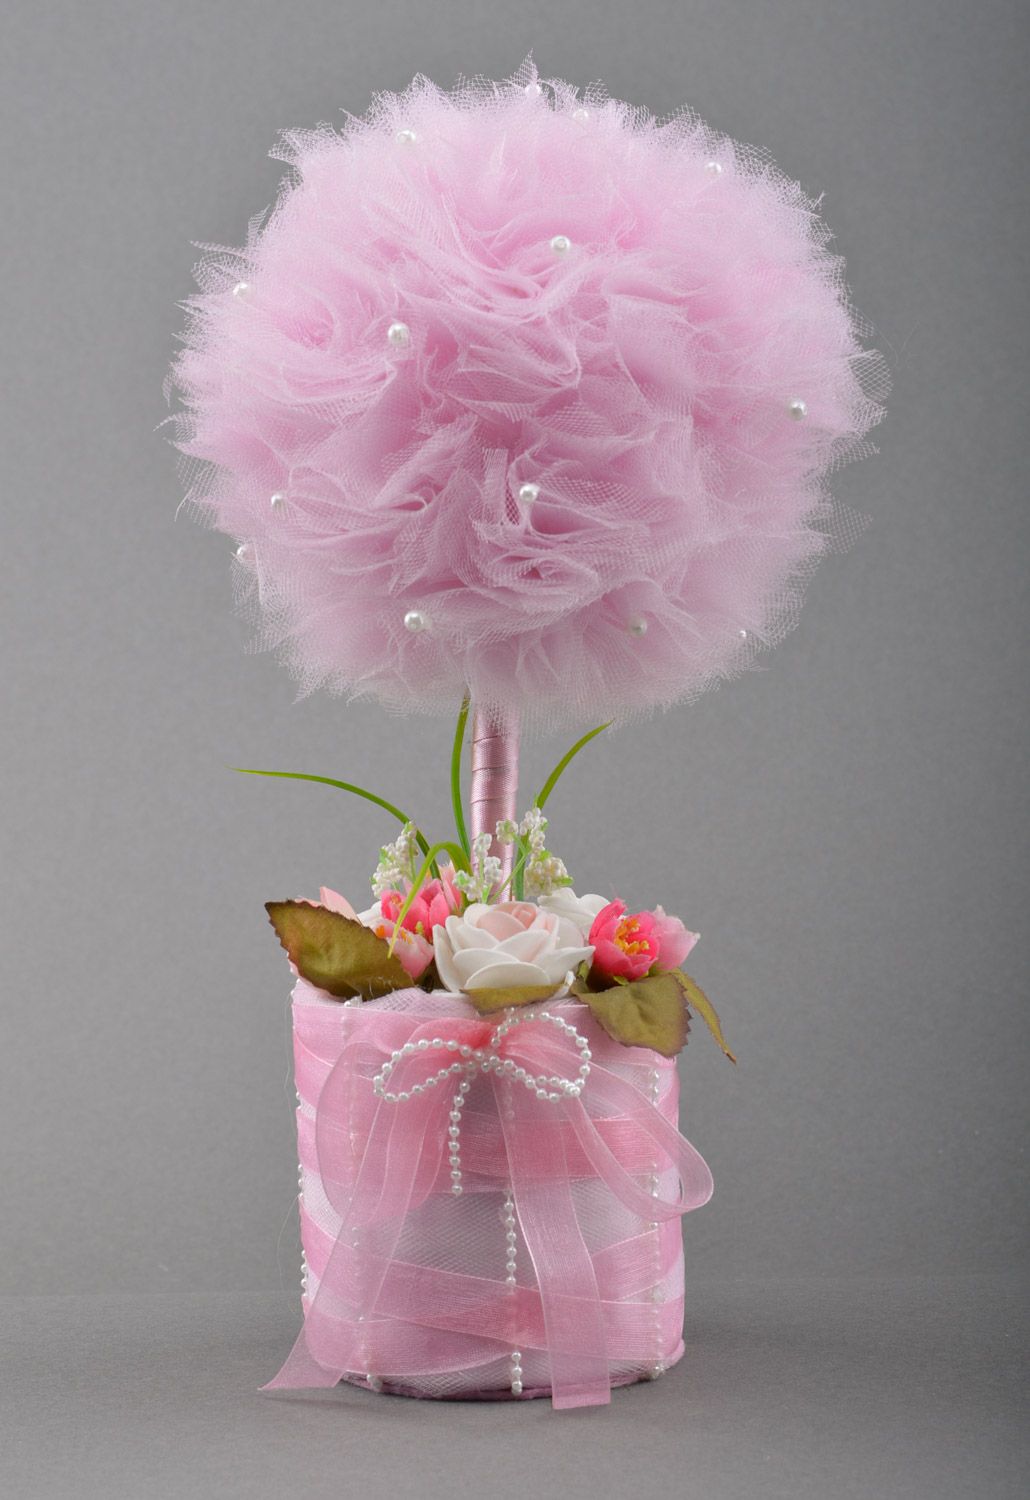 Handmade tender volume topiary tree with pink tulle and paper roses and lace photo 2